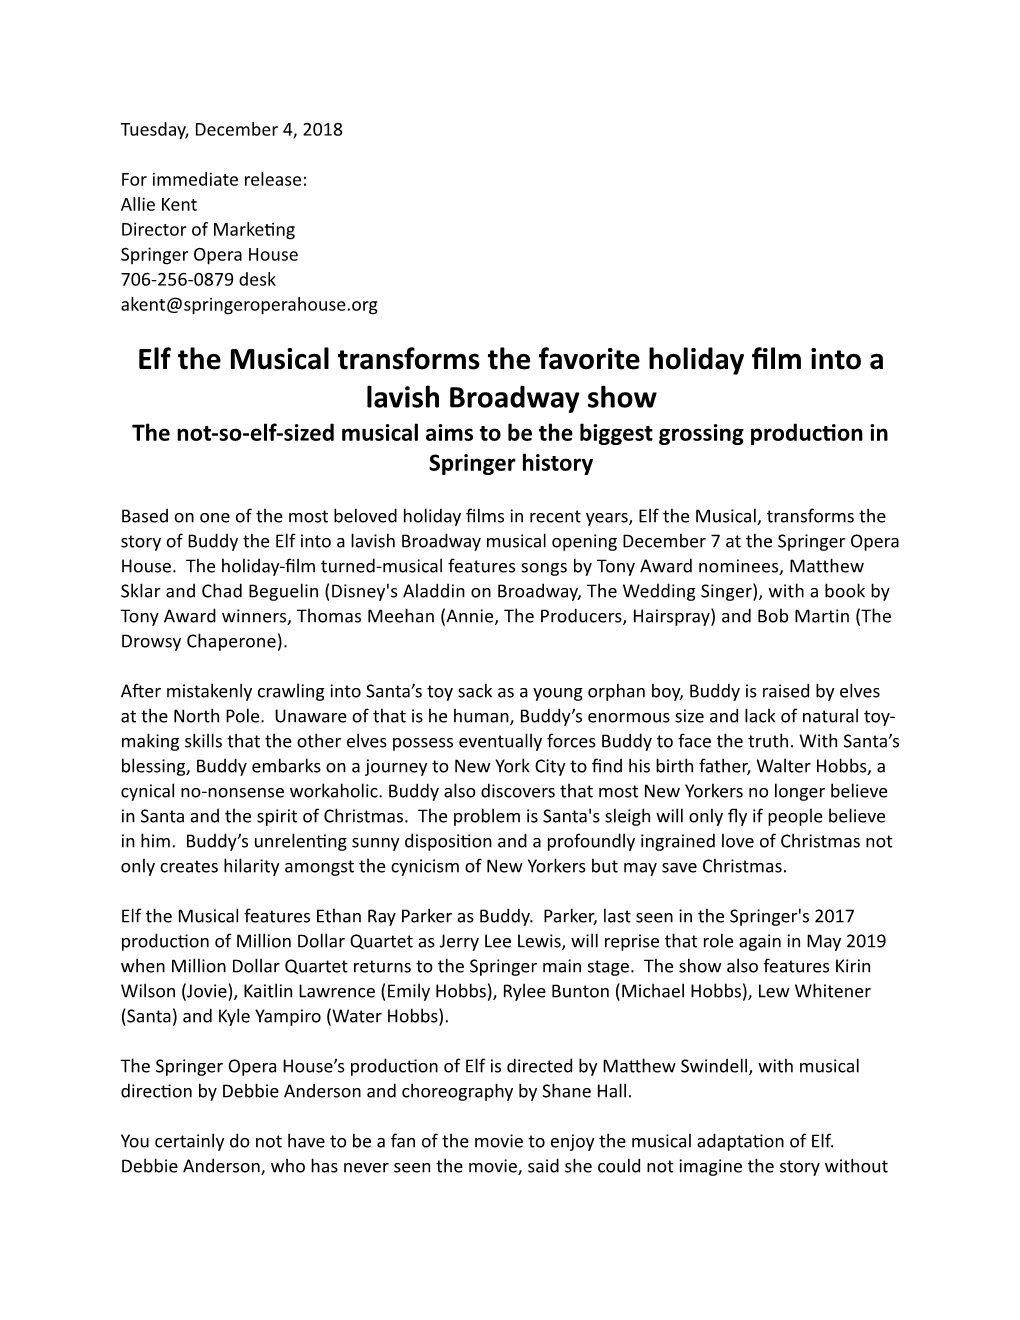 Elf the Musical Press Release